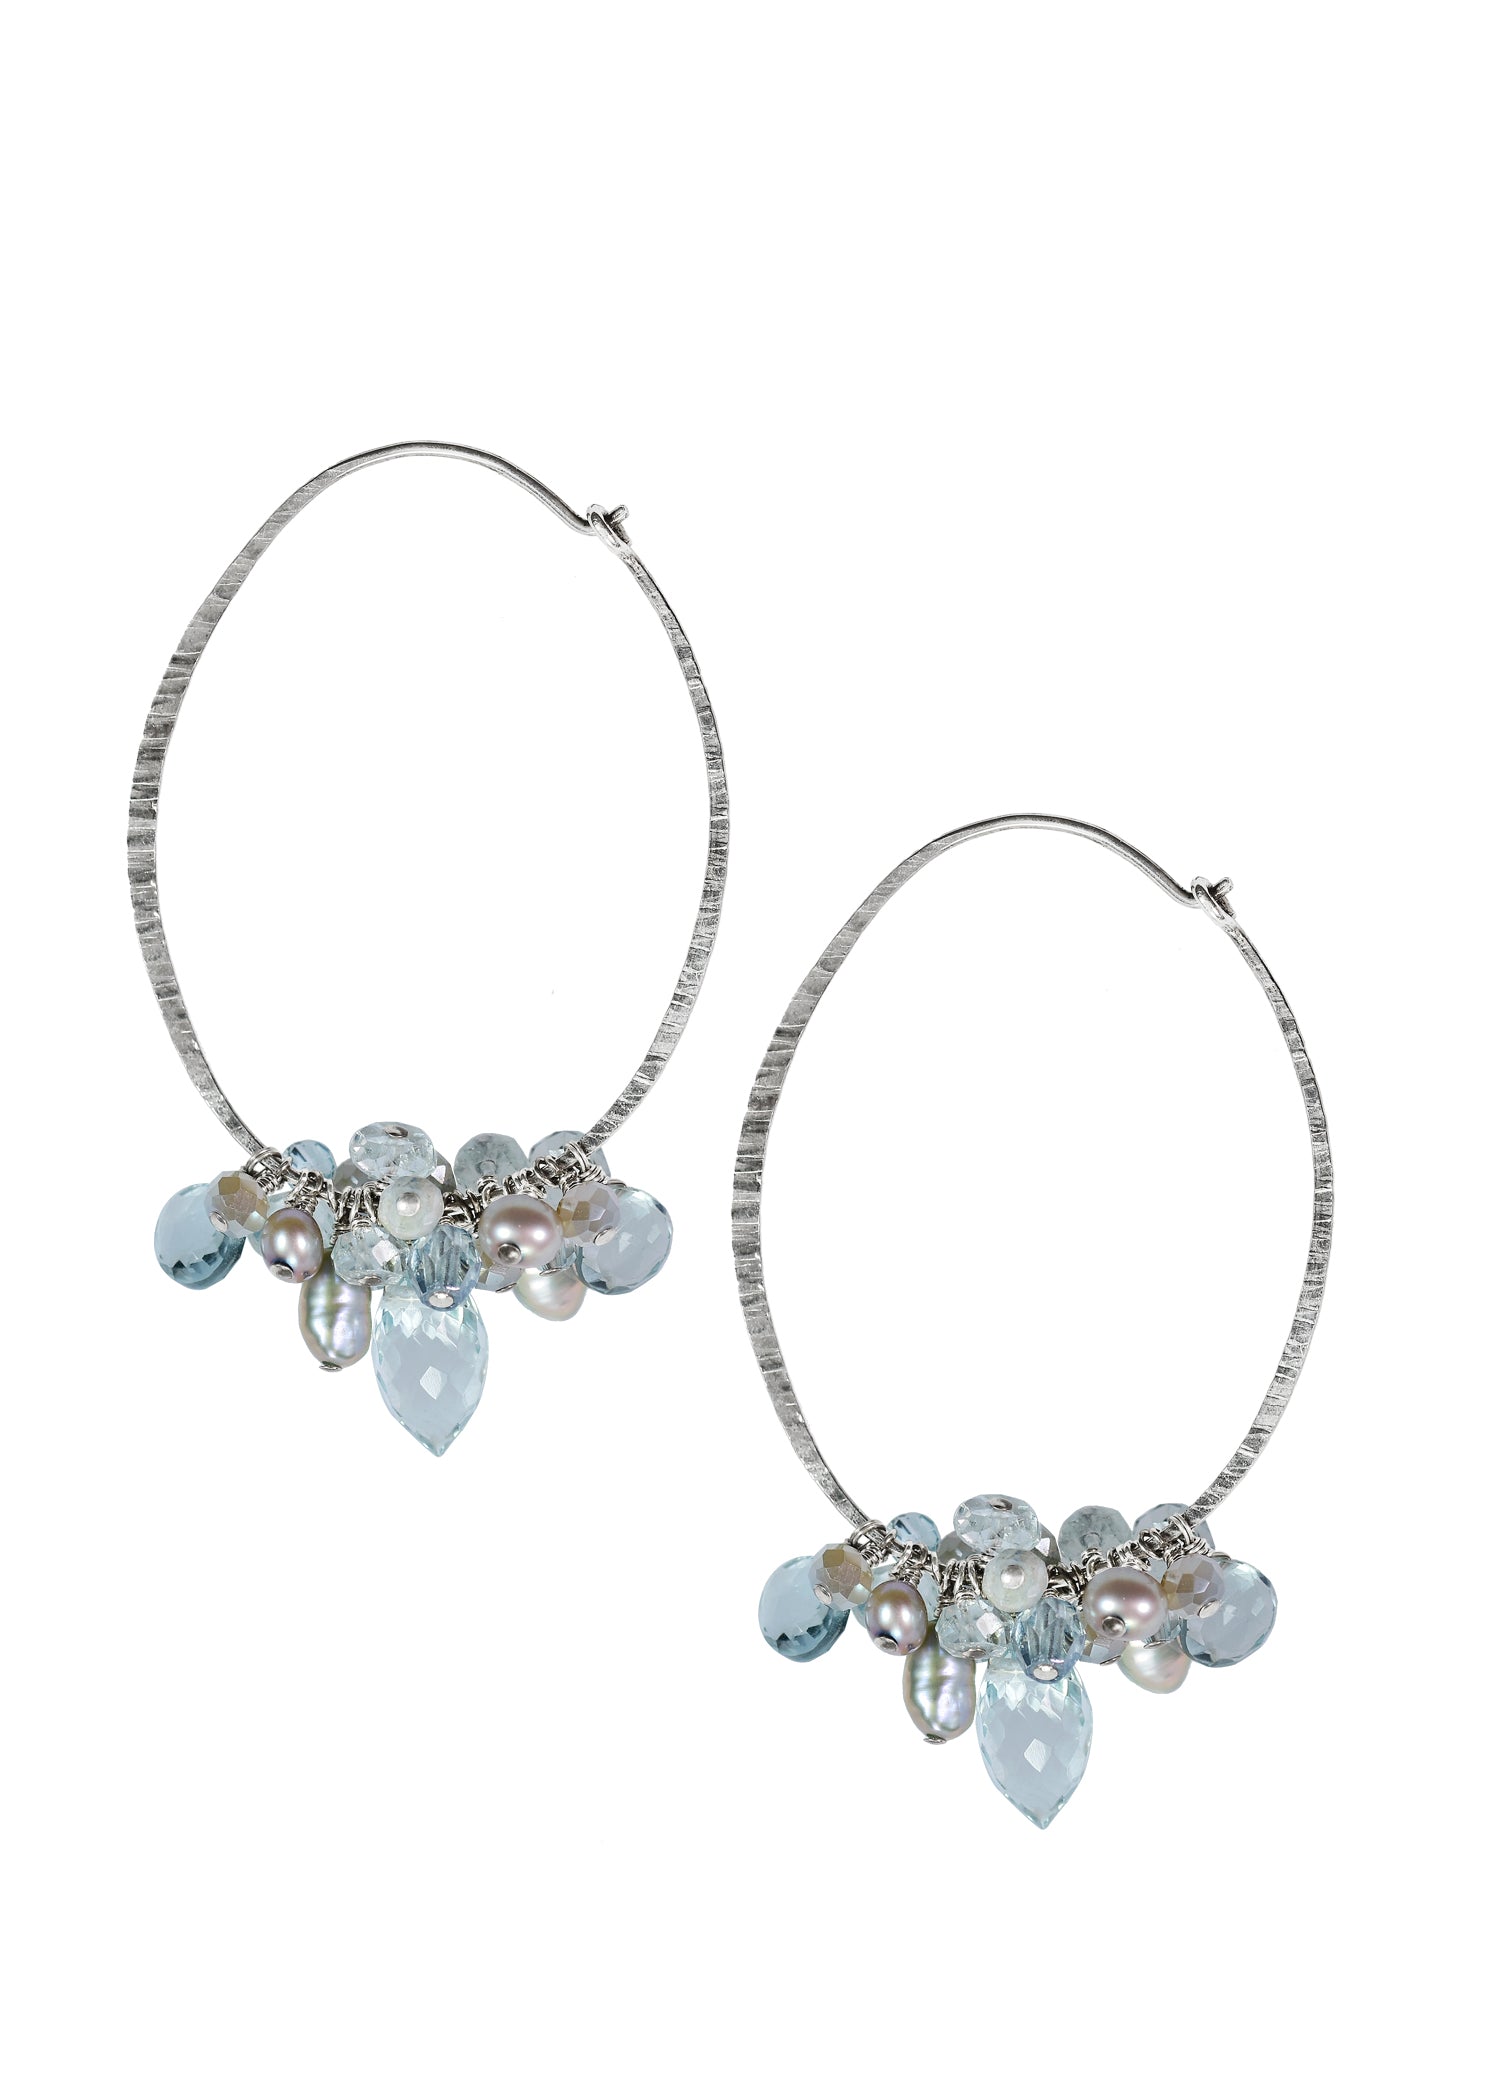 Aqua quartz Corundum Freshwater pearl Crystal Sterling silver Earrings measure 2" in length and 1-3/16" in width across the widest point of the hoop Handmade in our Los Angeles studio